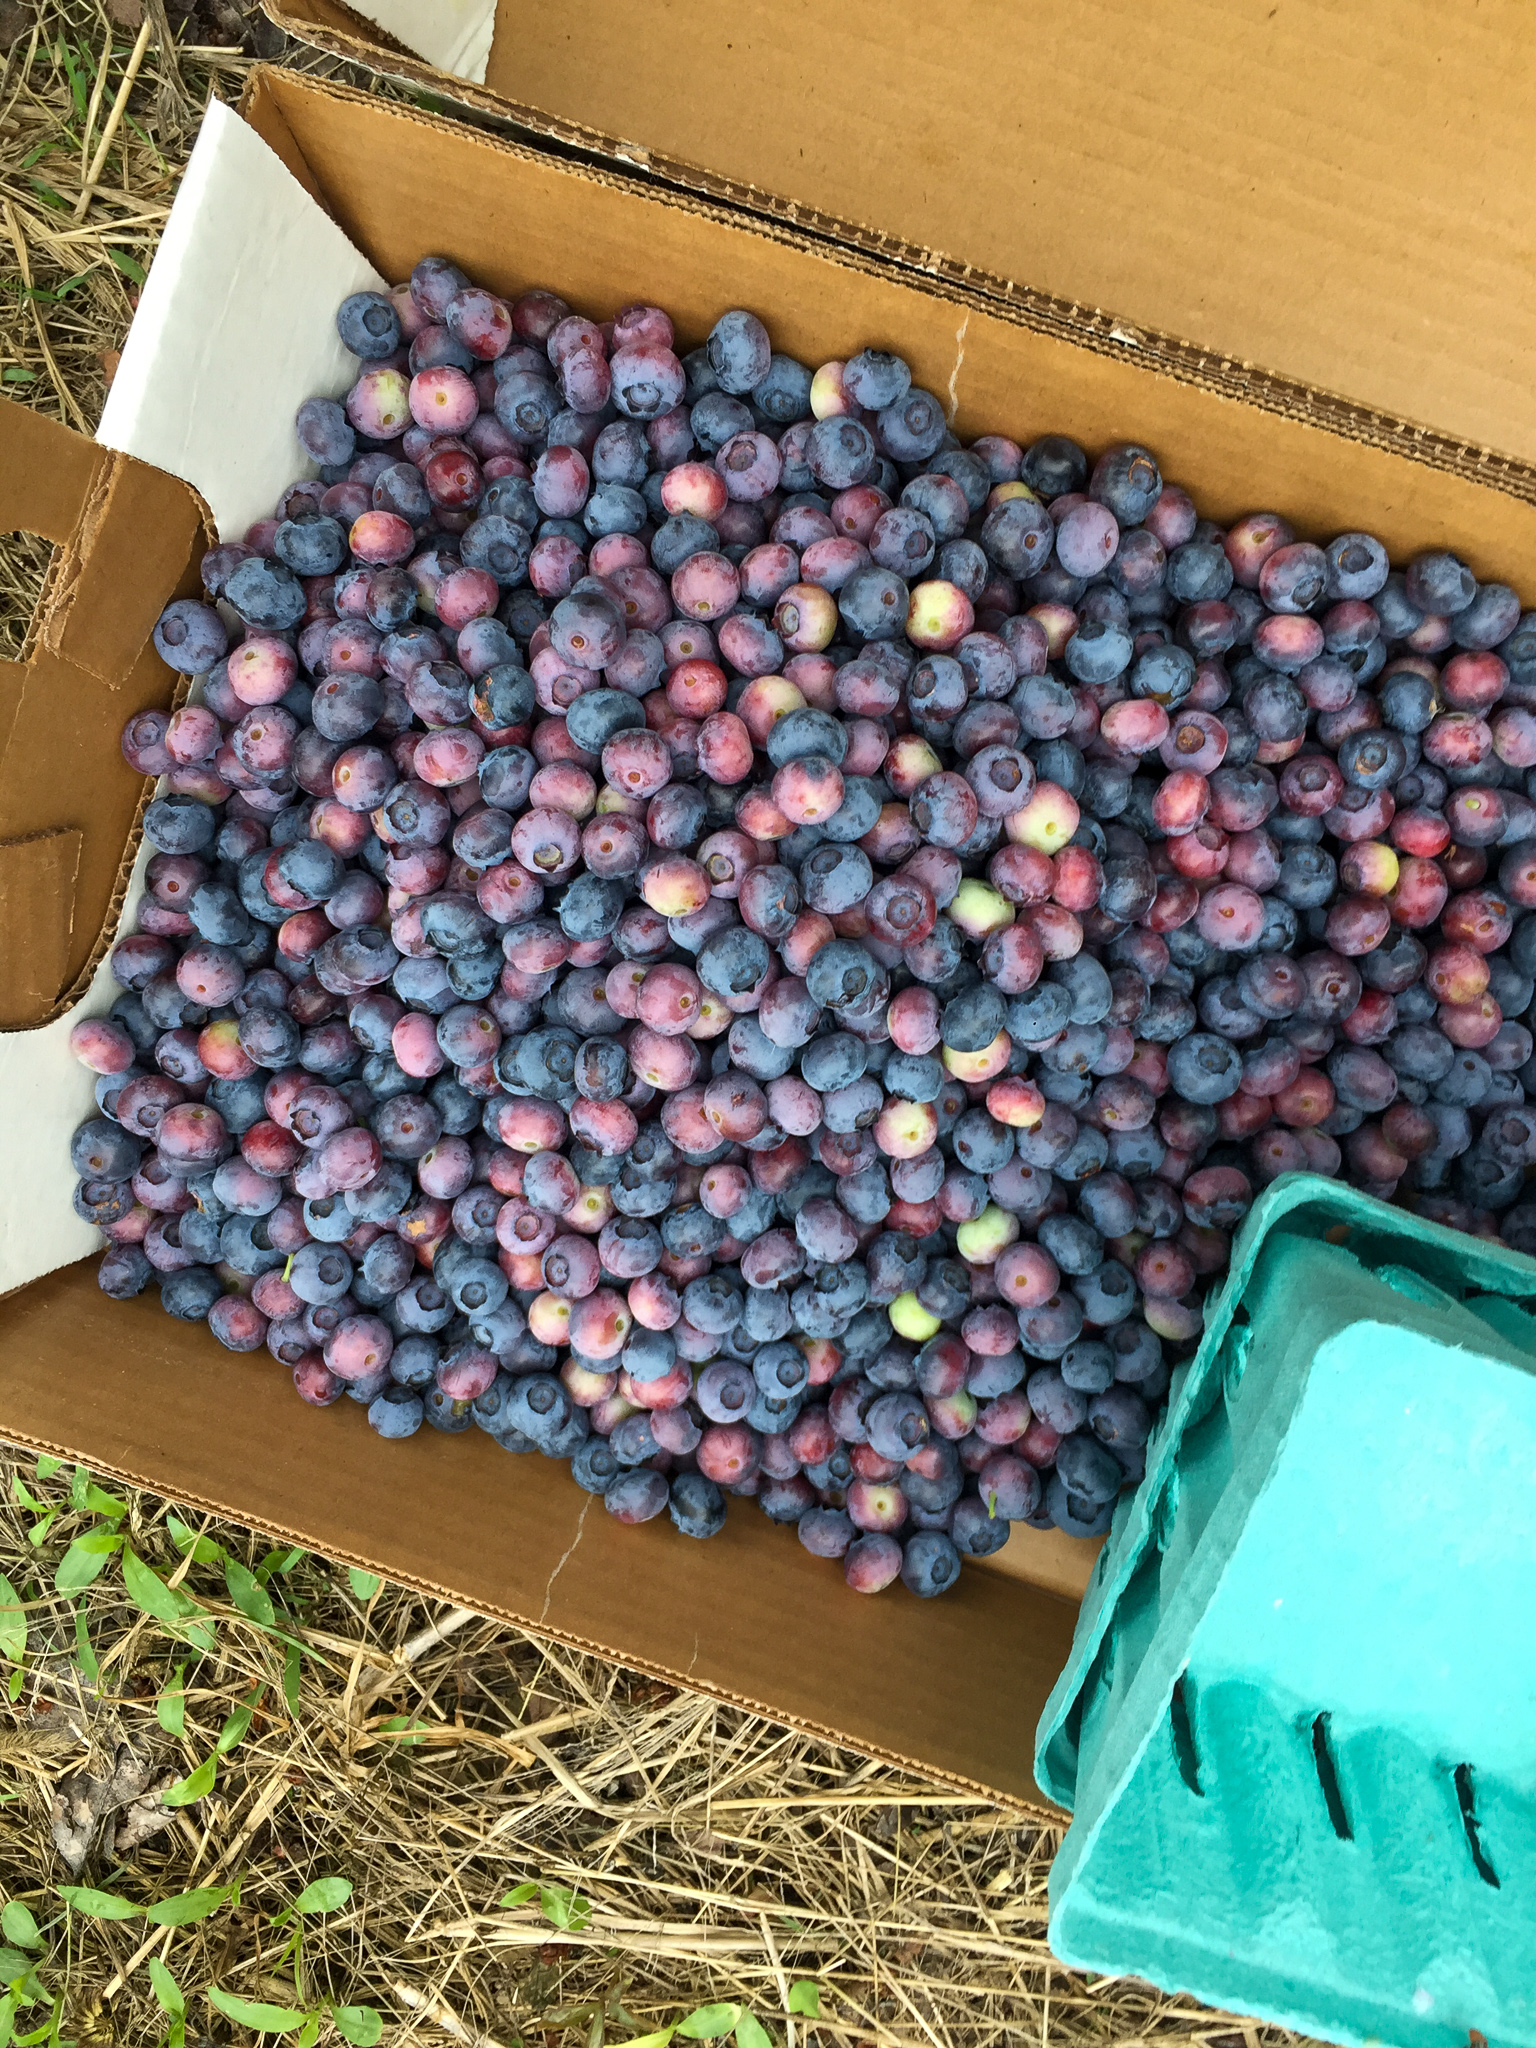 crate of blueberries from Orchard